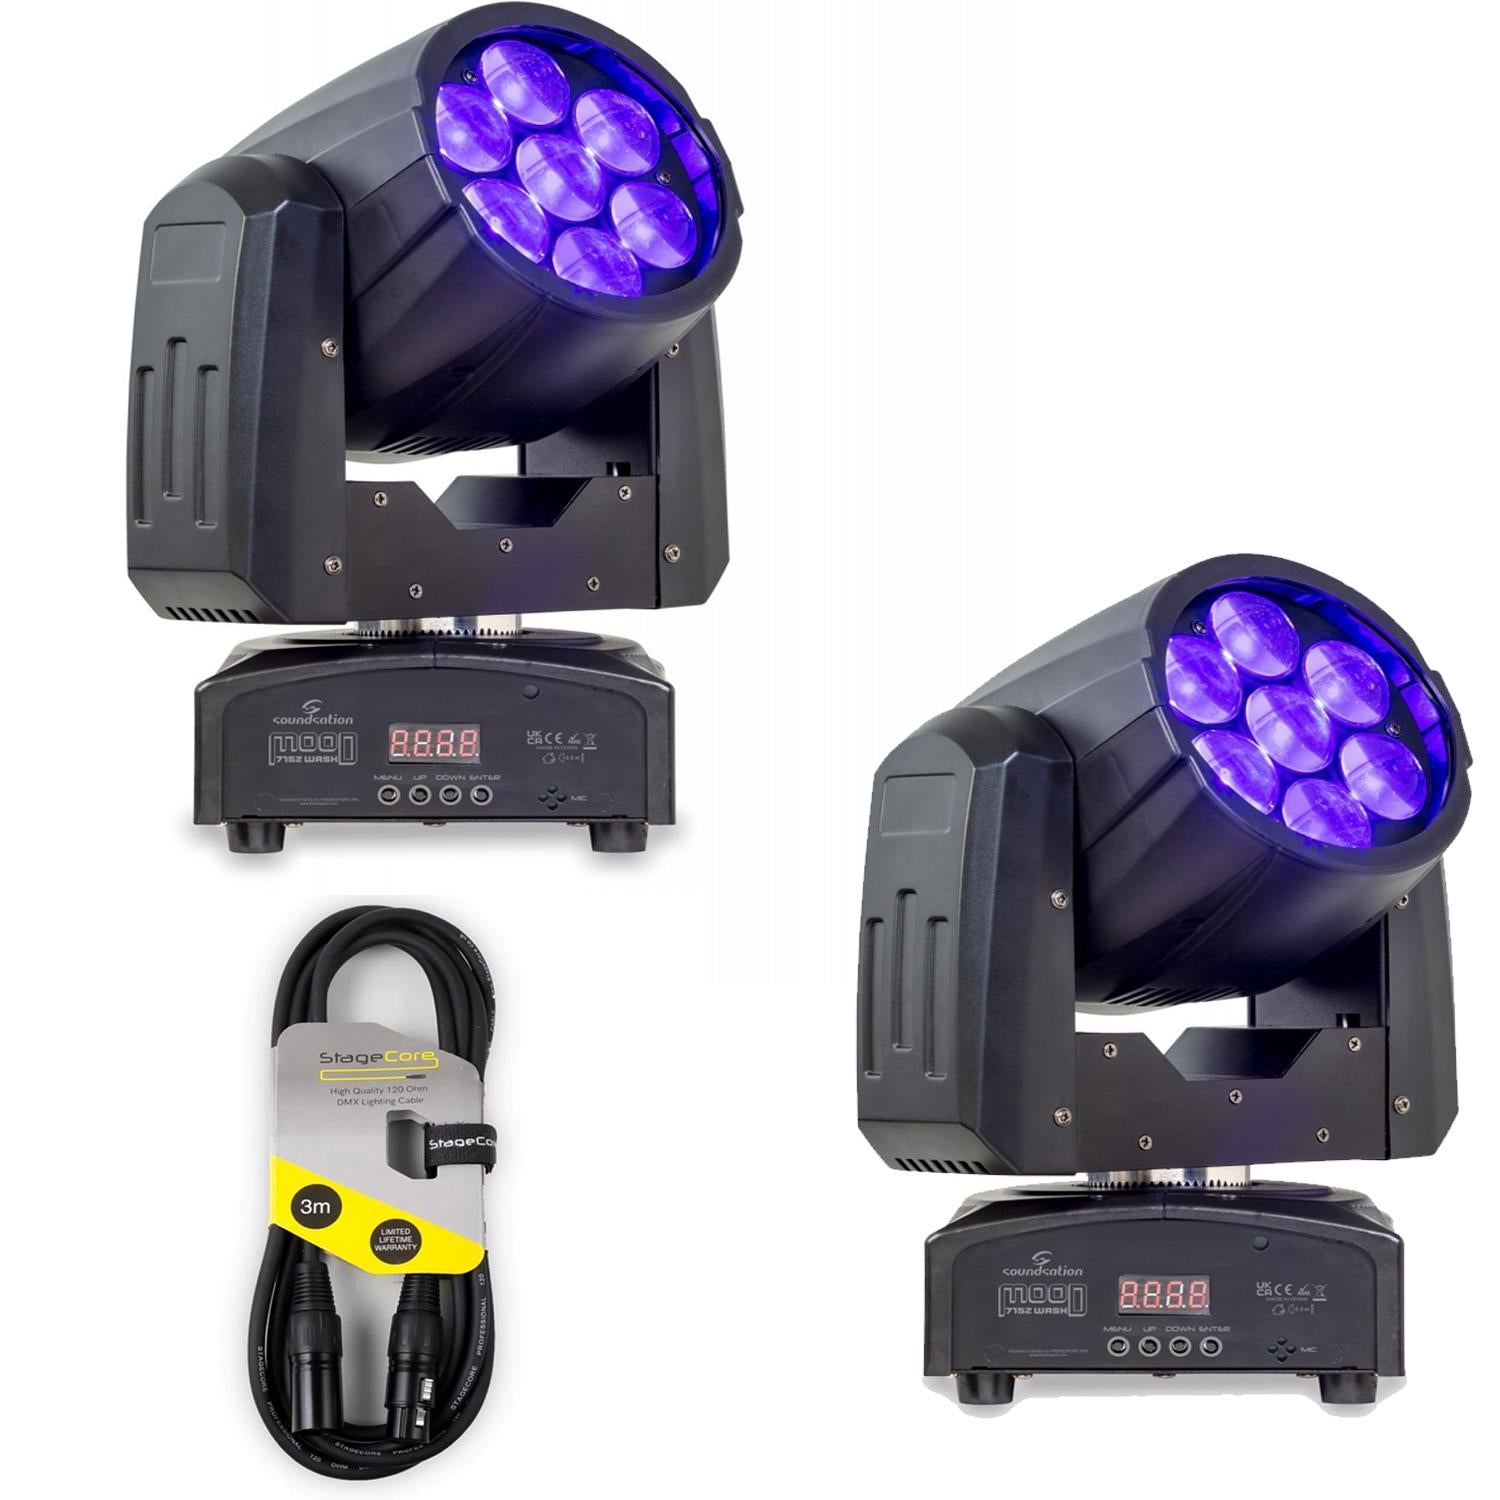 2 x Soundsation Mood 715Z Wash 7x15w Moving Head with DMX Cable